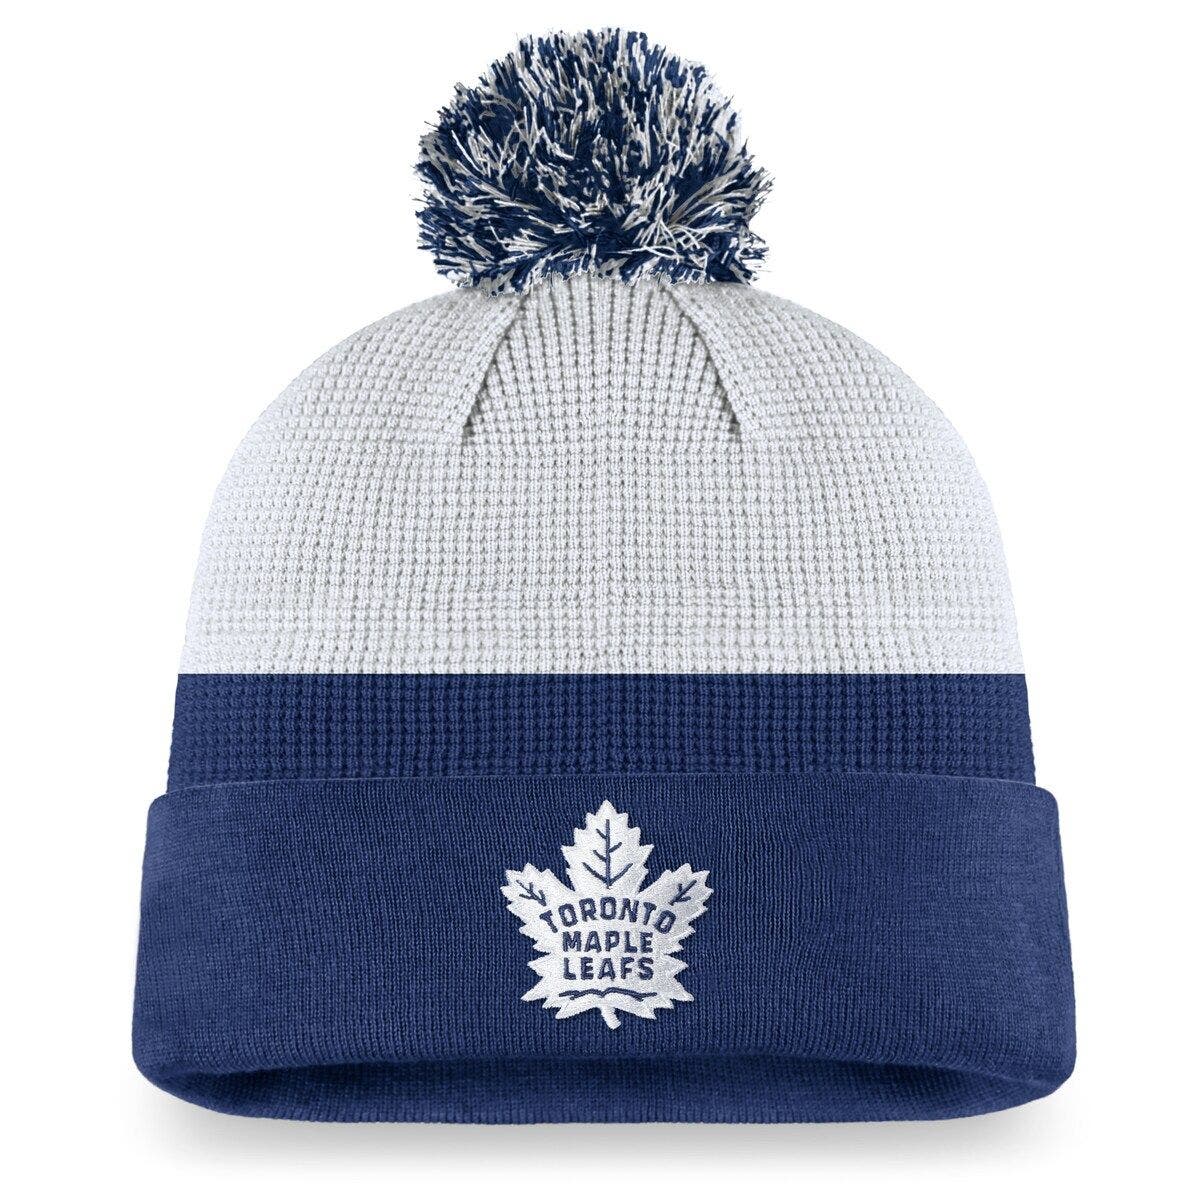 Blue Beanie Outerstuff Youth Toronto Maple Leafs Cuffless Knit Hat Boys 8-20 